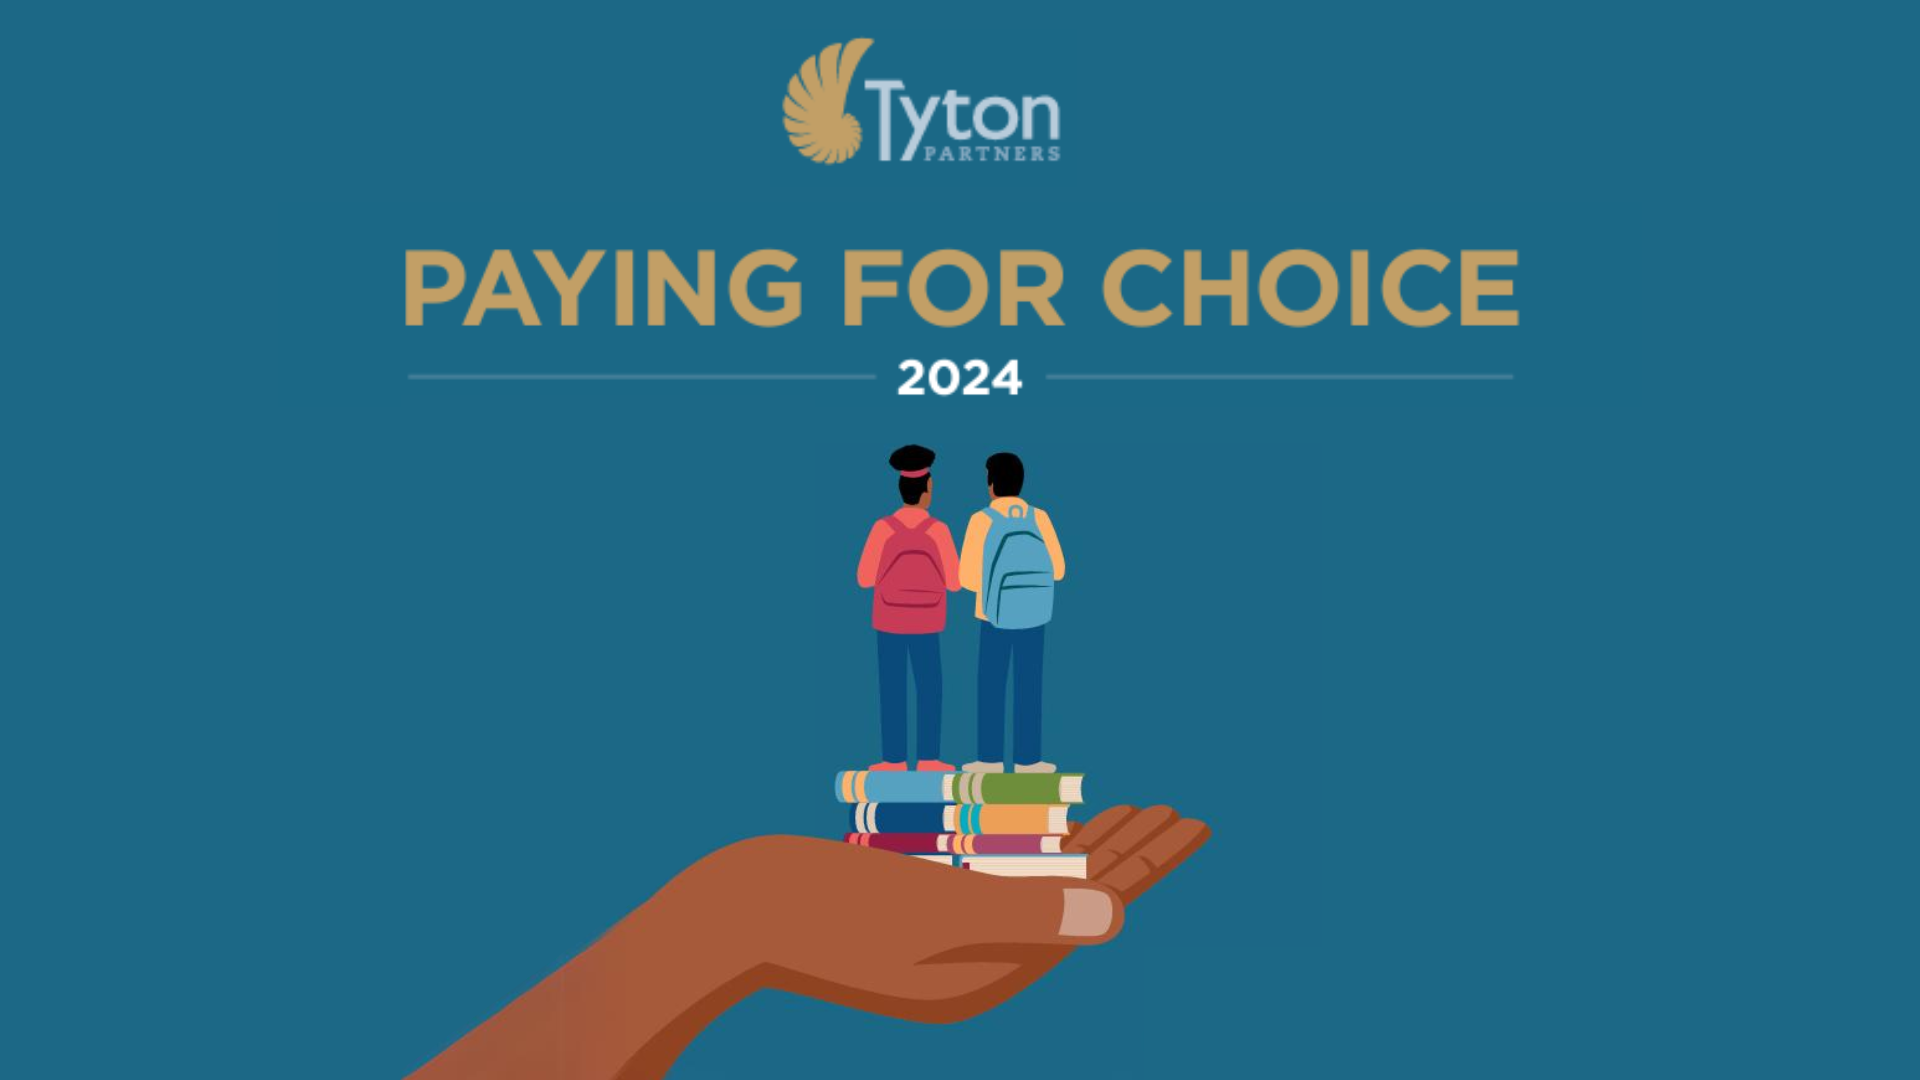 Tyton Partners Paying for Choice 2024